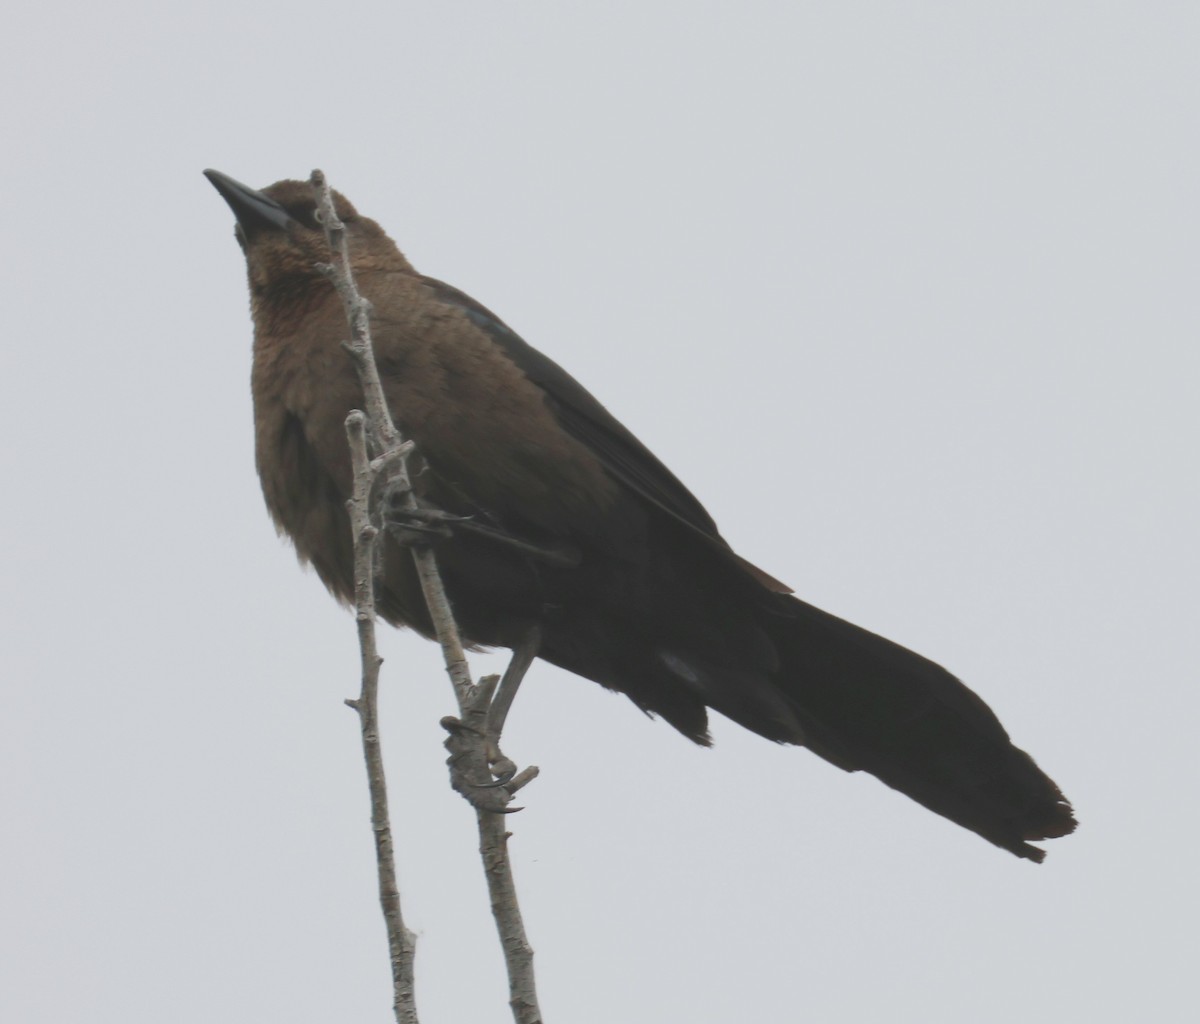 Great-tailed Grackle - Vince Folsom